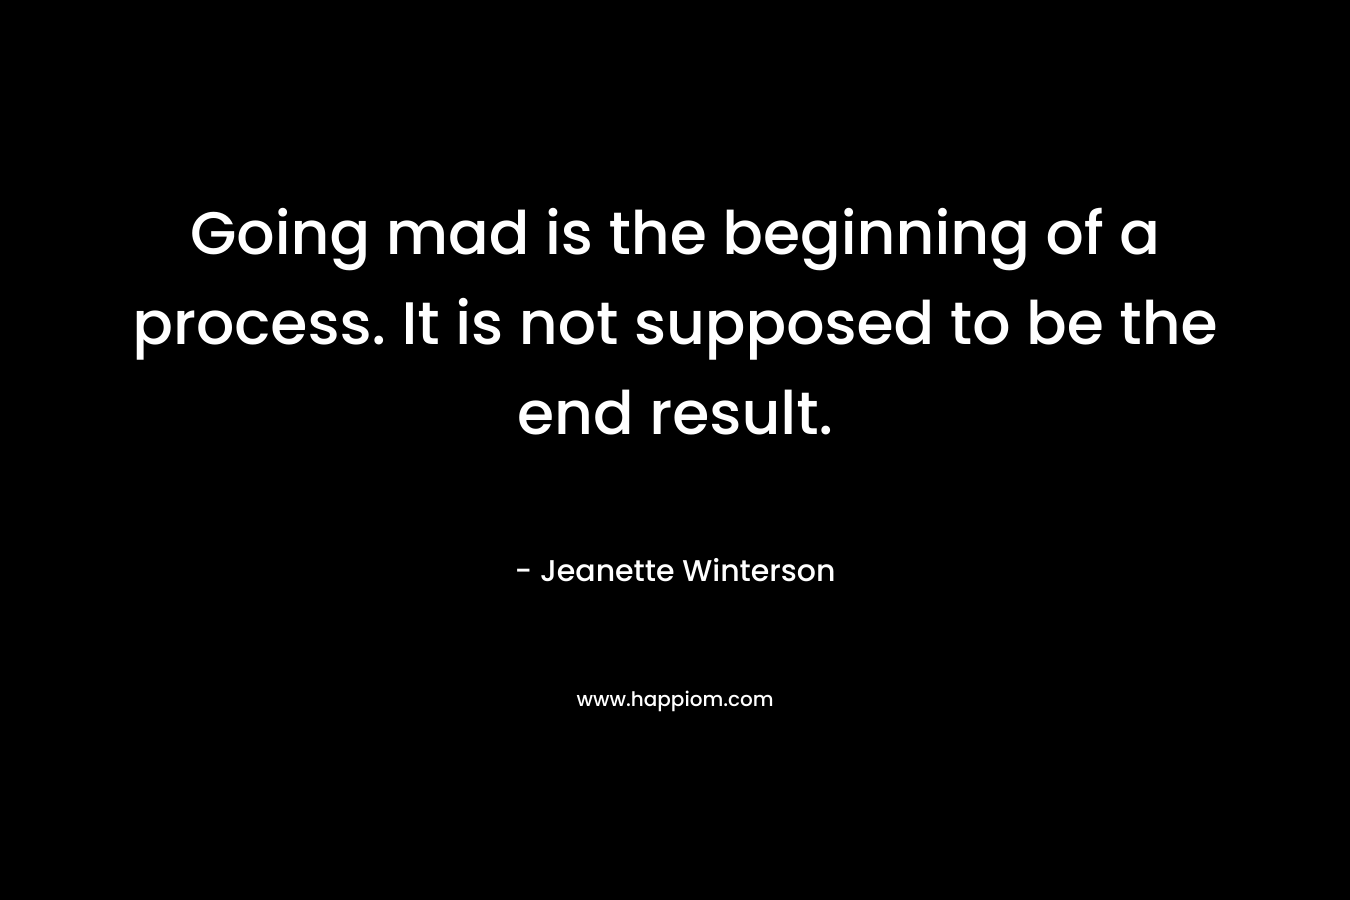 Going mad is the beginning of a process. It is not supposed to be the end result. – Jeanette Winterson